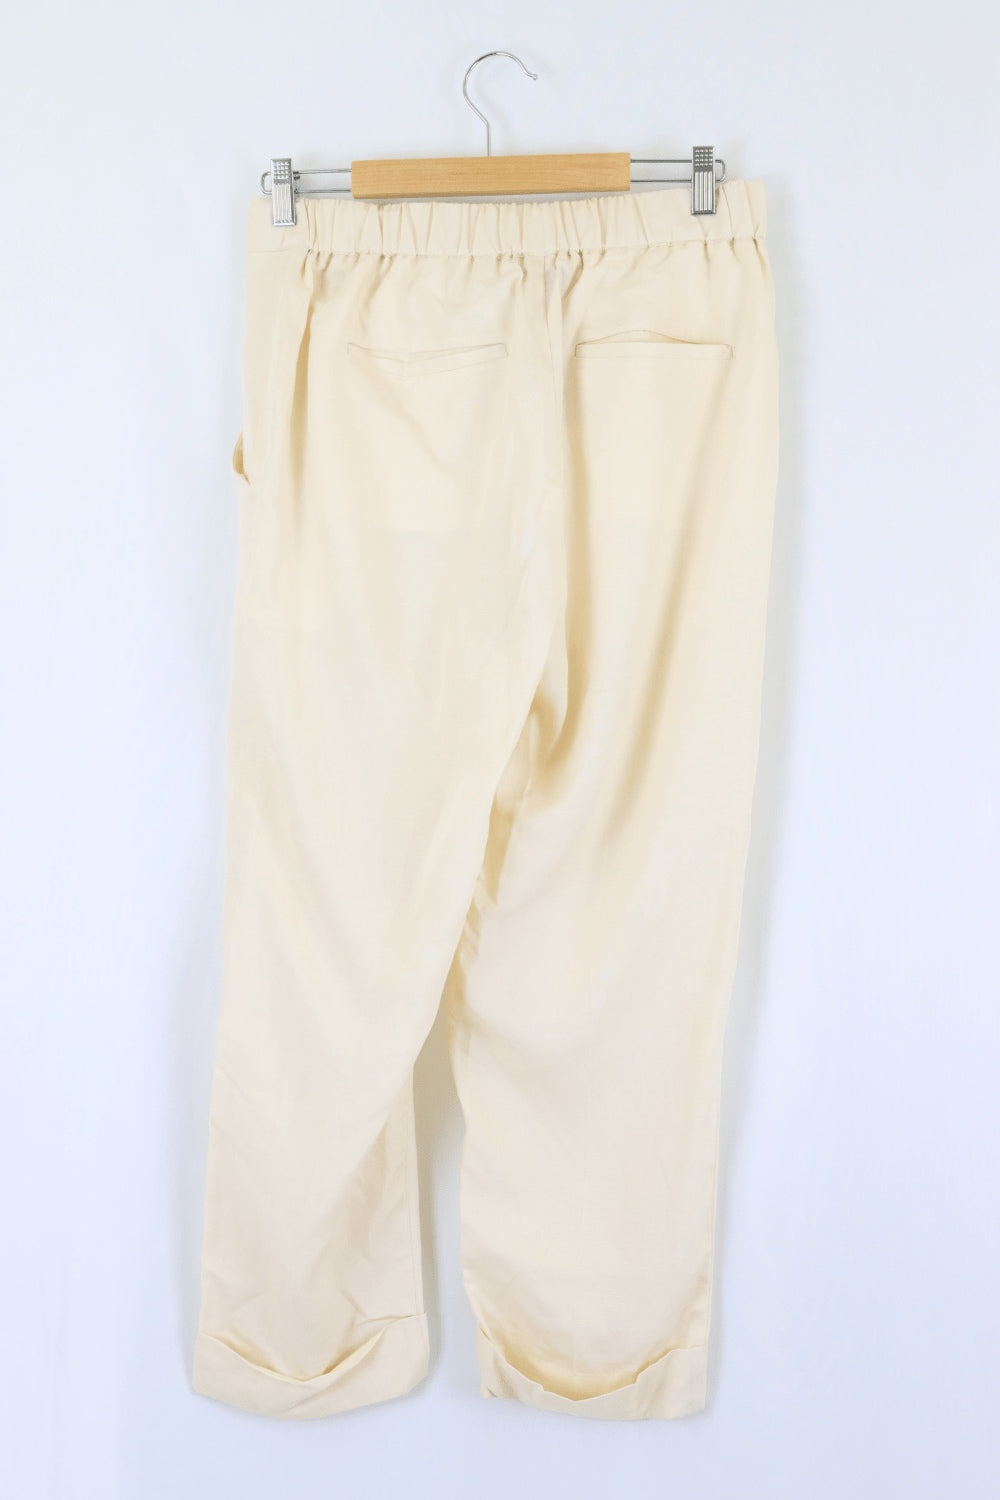 Preview Beige Pants 10